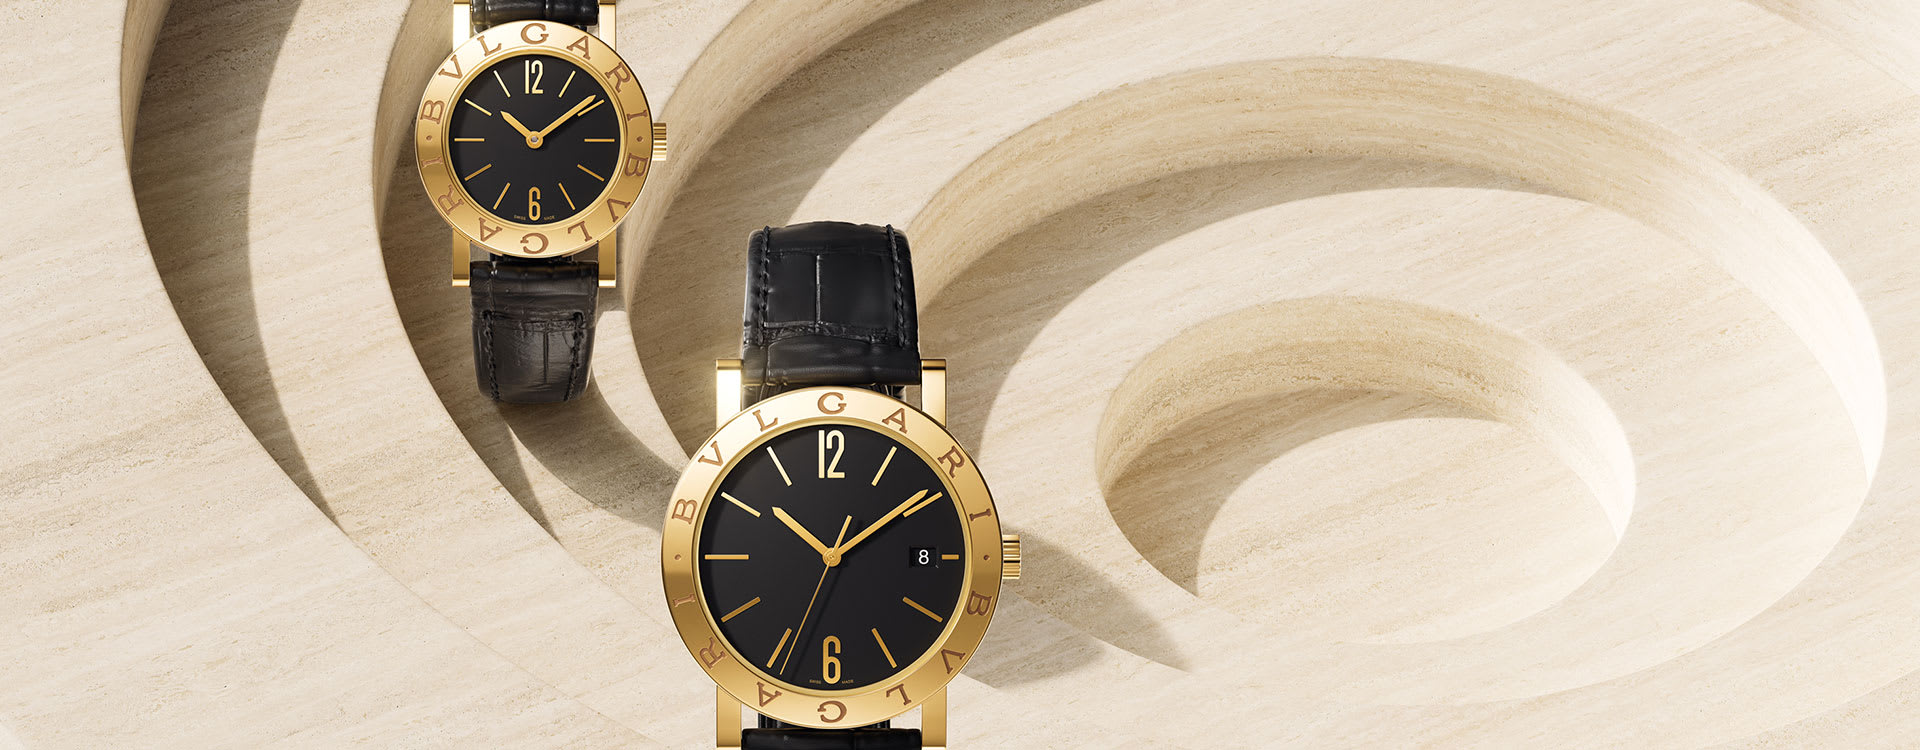 Bvlgari Bvlgari watches with yellow gold case in two different sizes, black dial and alligator strap.